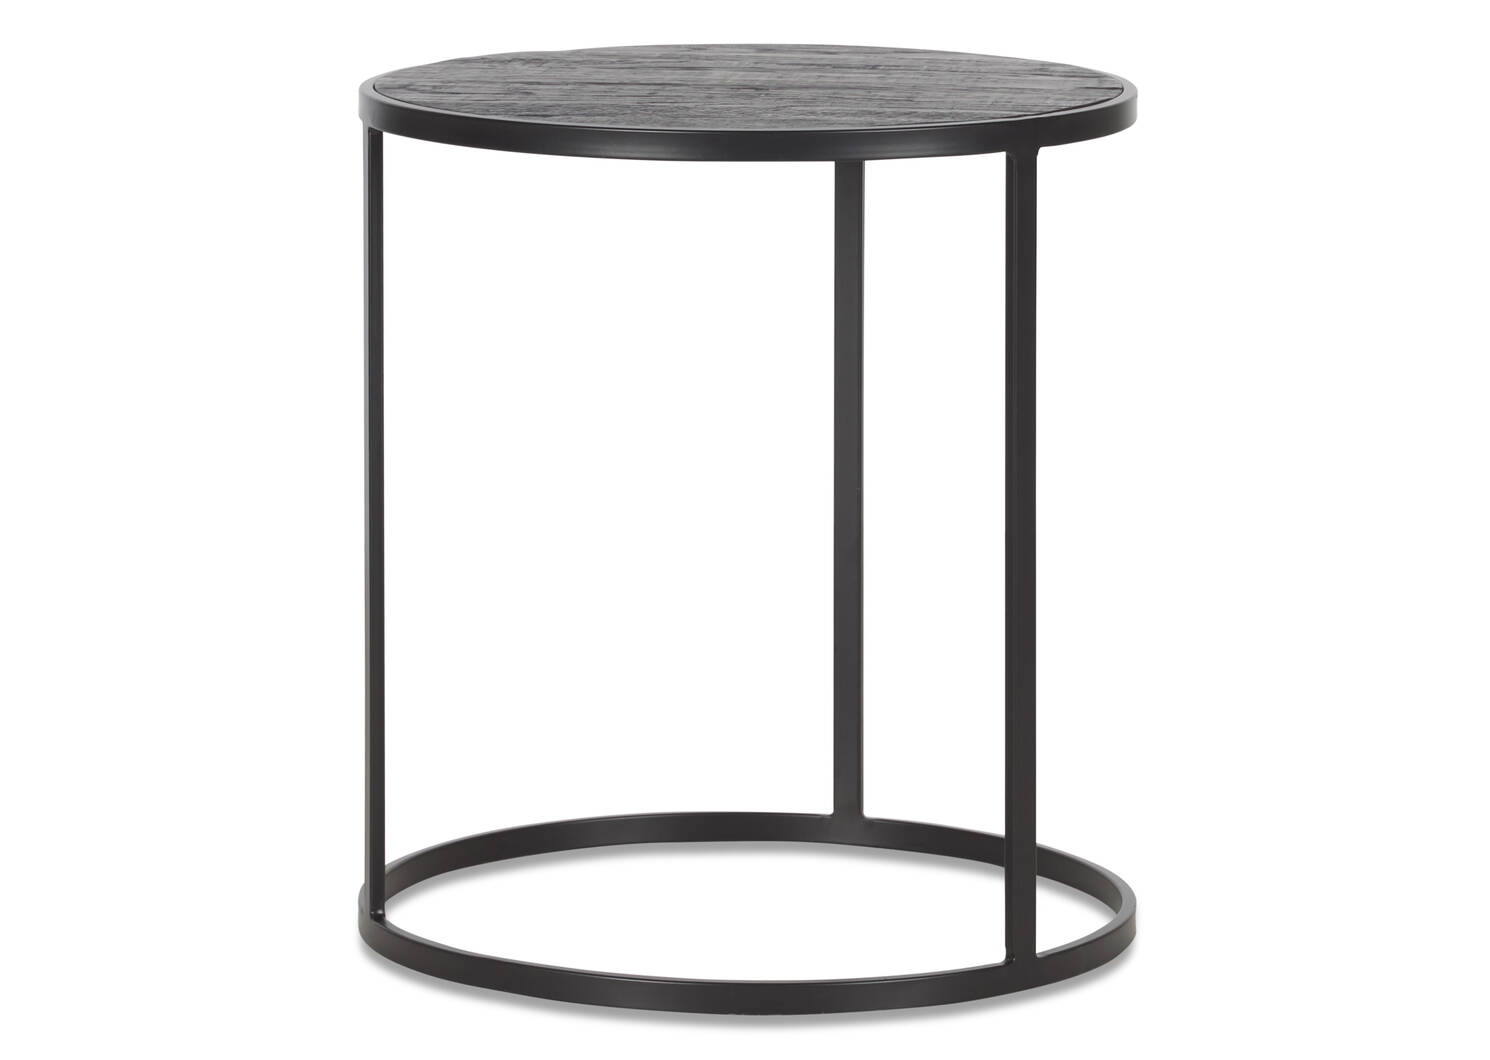 Table d'appoint Madera -chêne noir